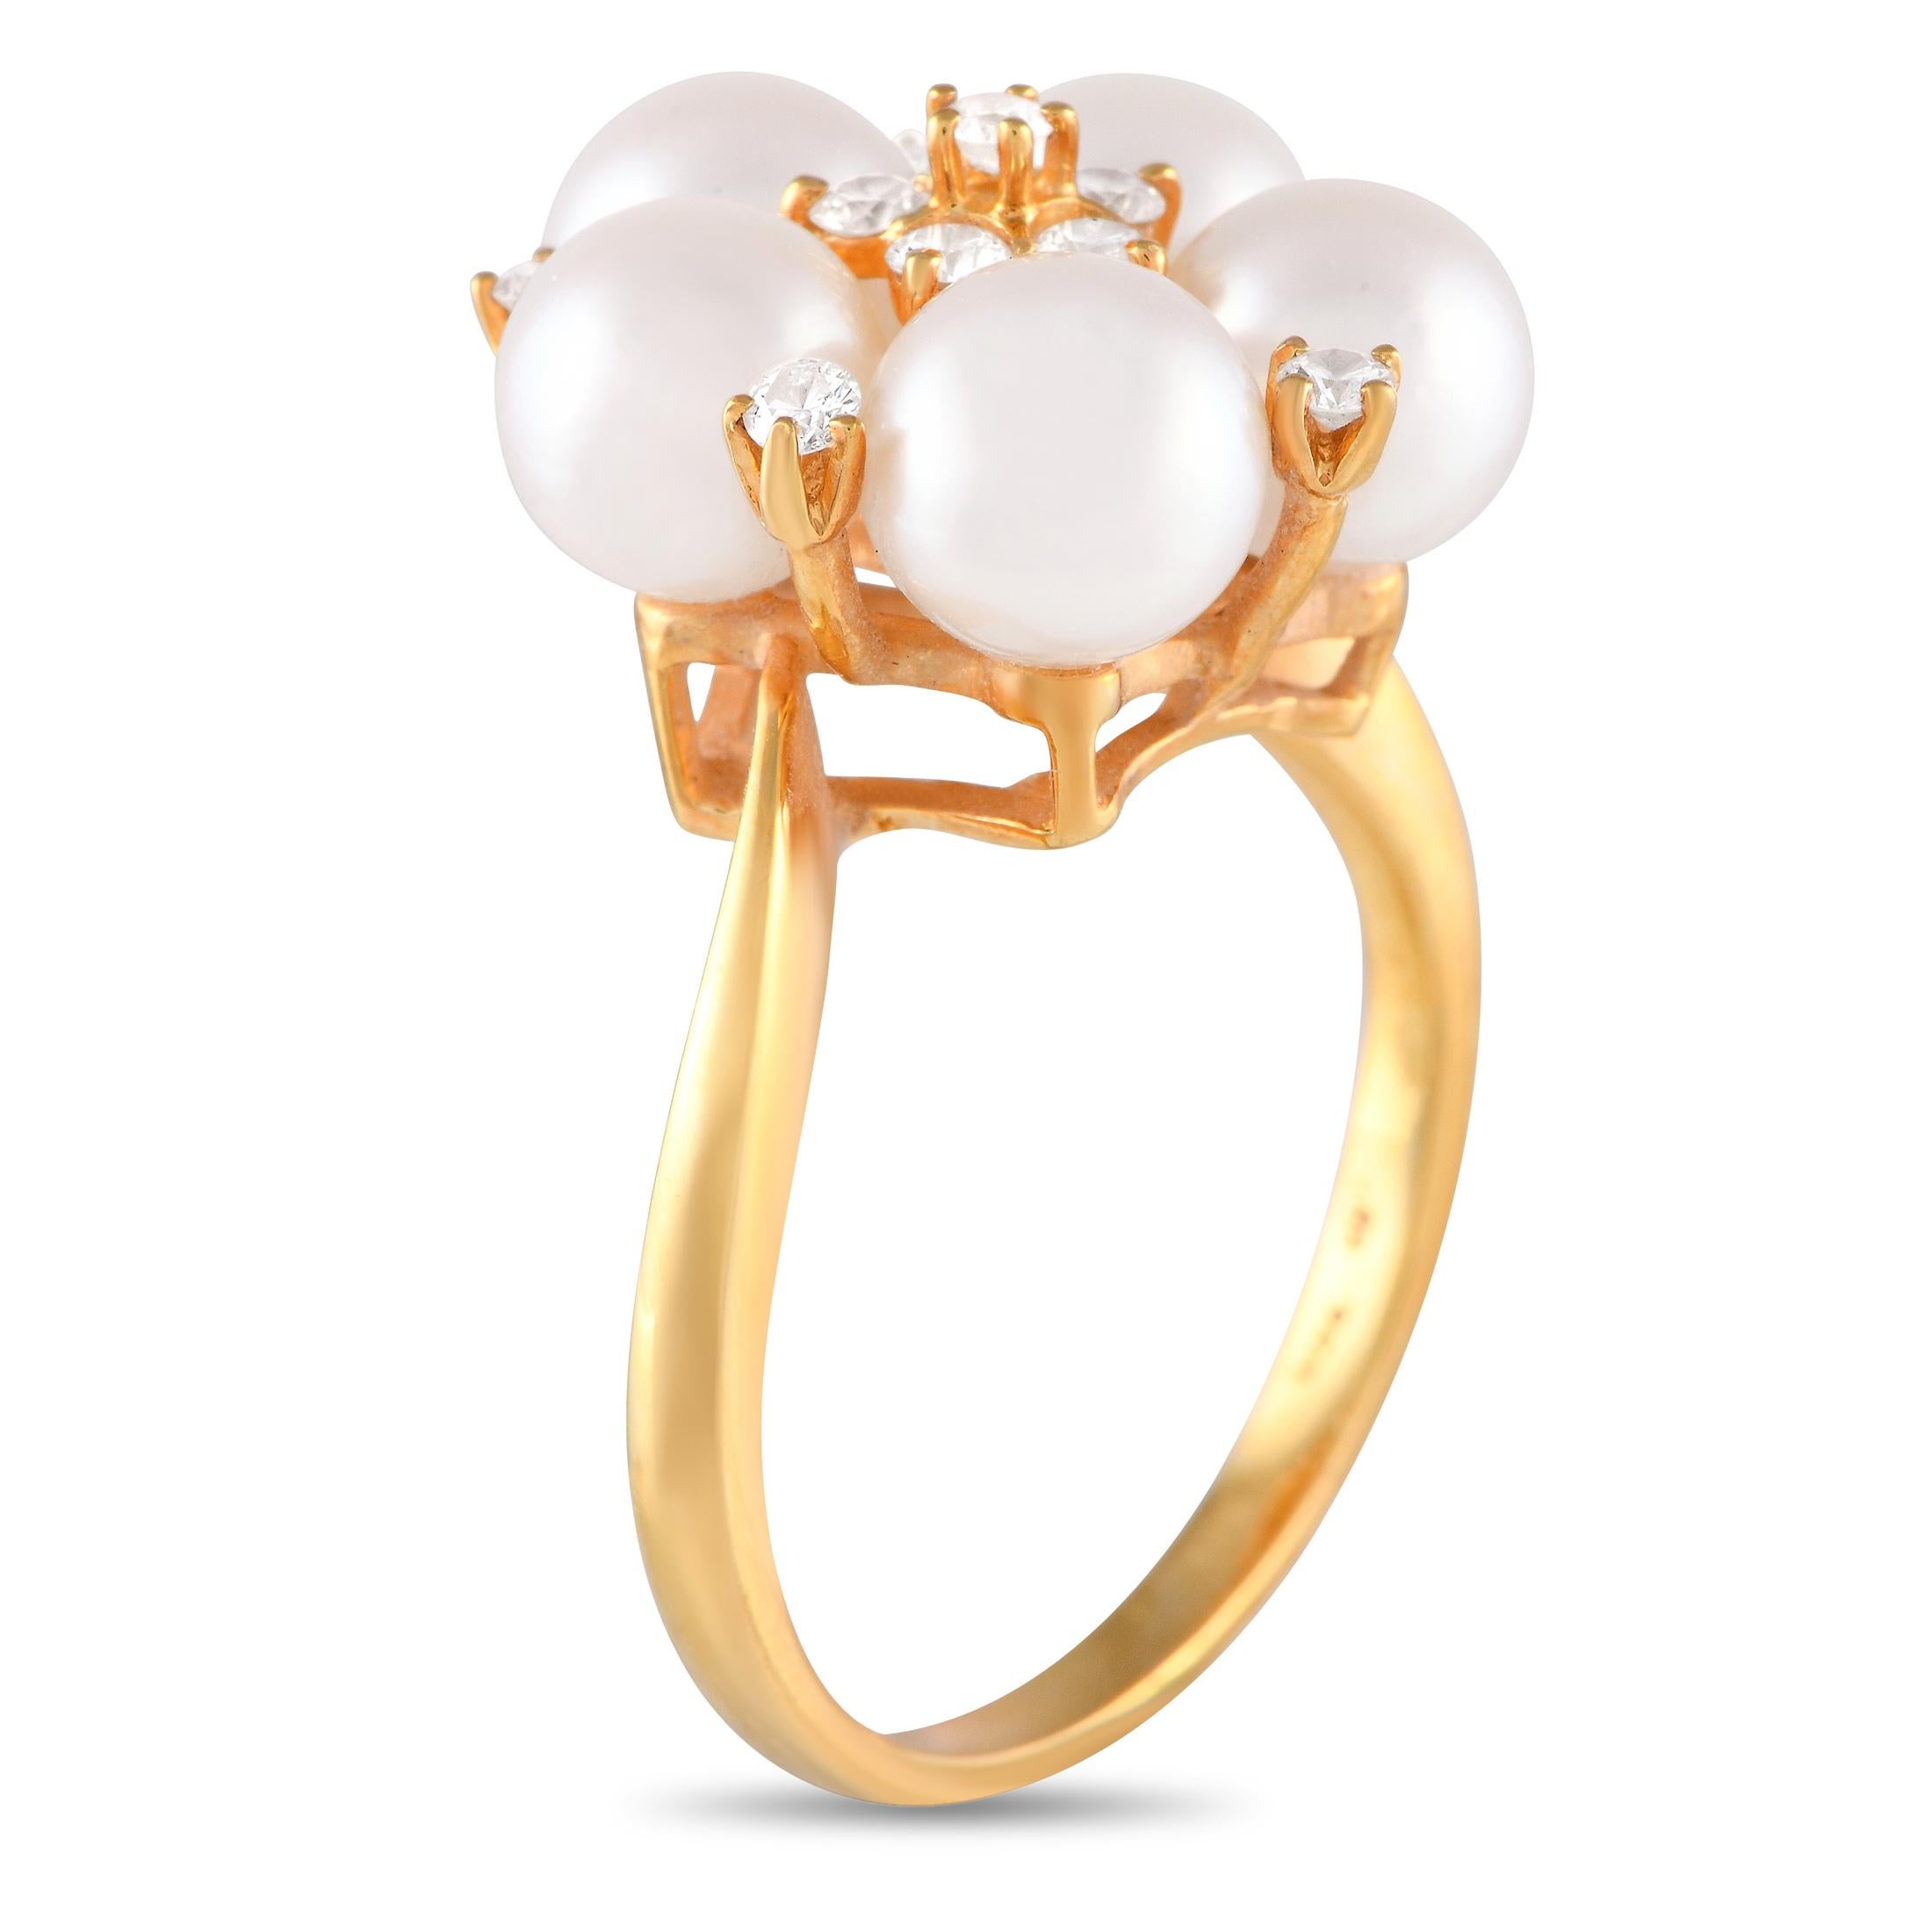 There’s something incredibly chic about this elegant Mikimoto ring. At the top of the delicate 18K Yellow Gold setting, you’ll find 6.5mm pearls elevated by sparkling Diamond accents totaling 0.22 carats. It features a 1mm wide band and a commanding